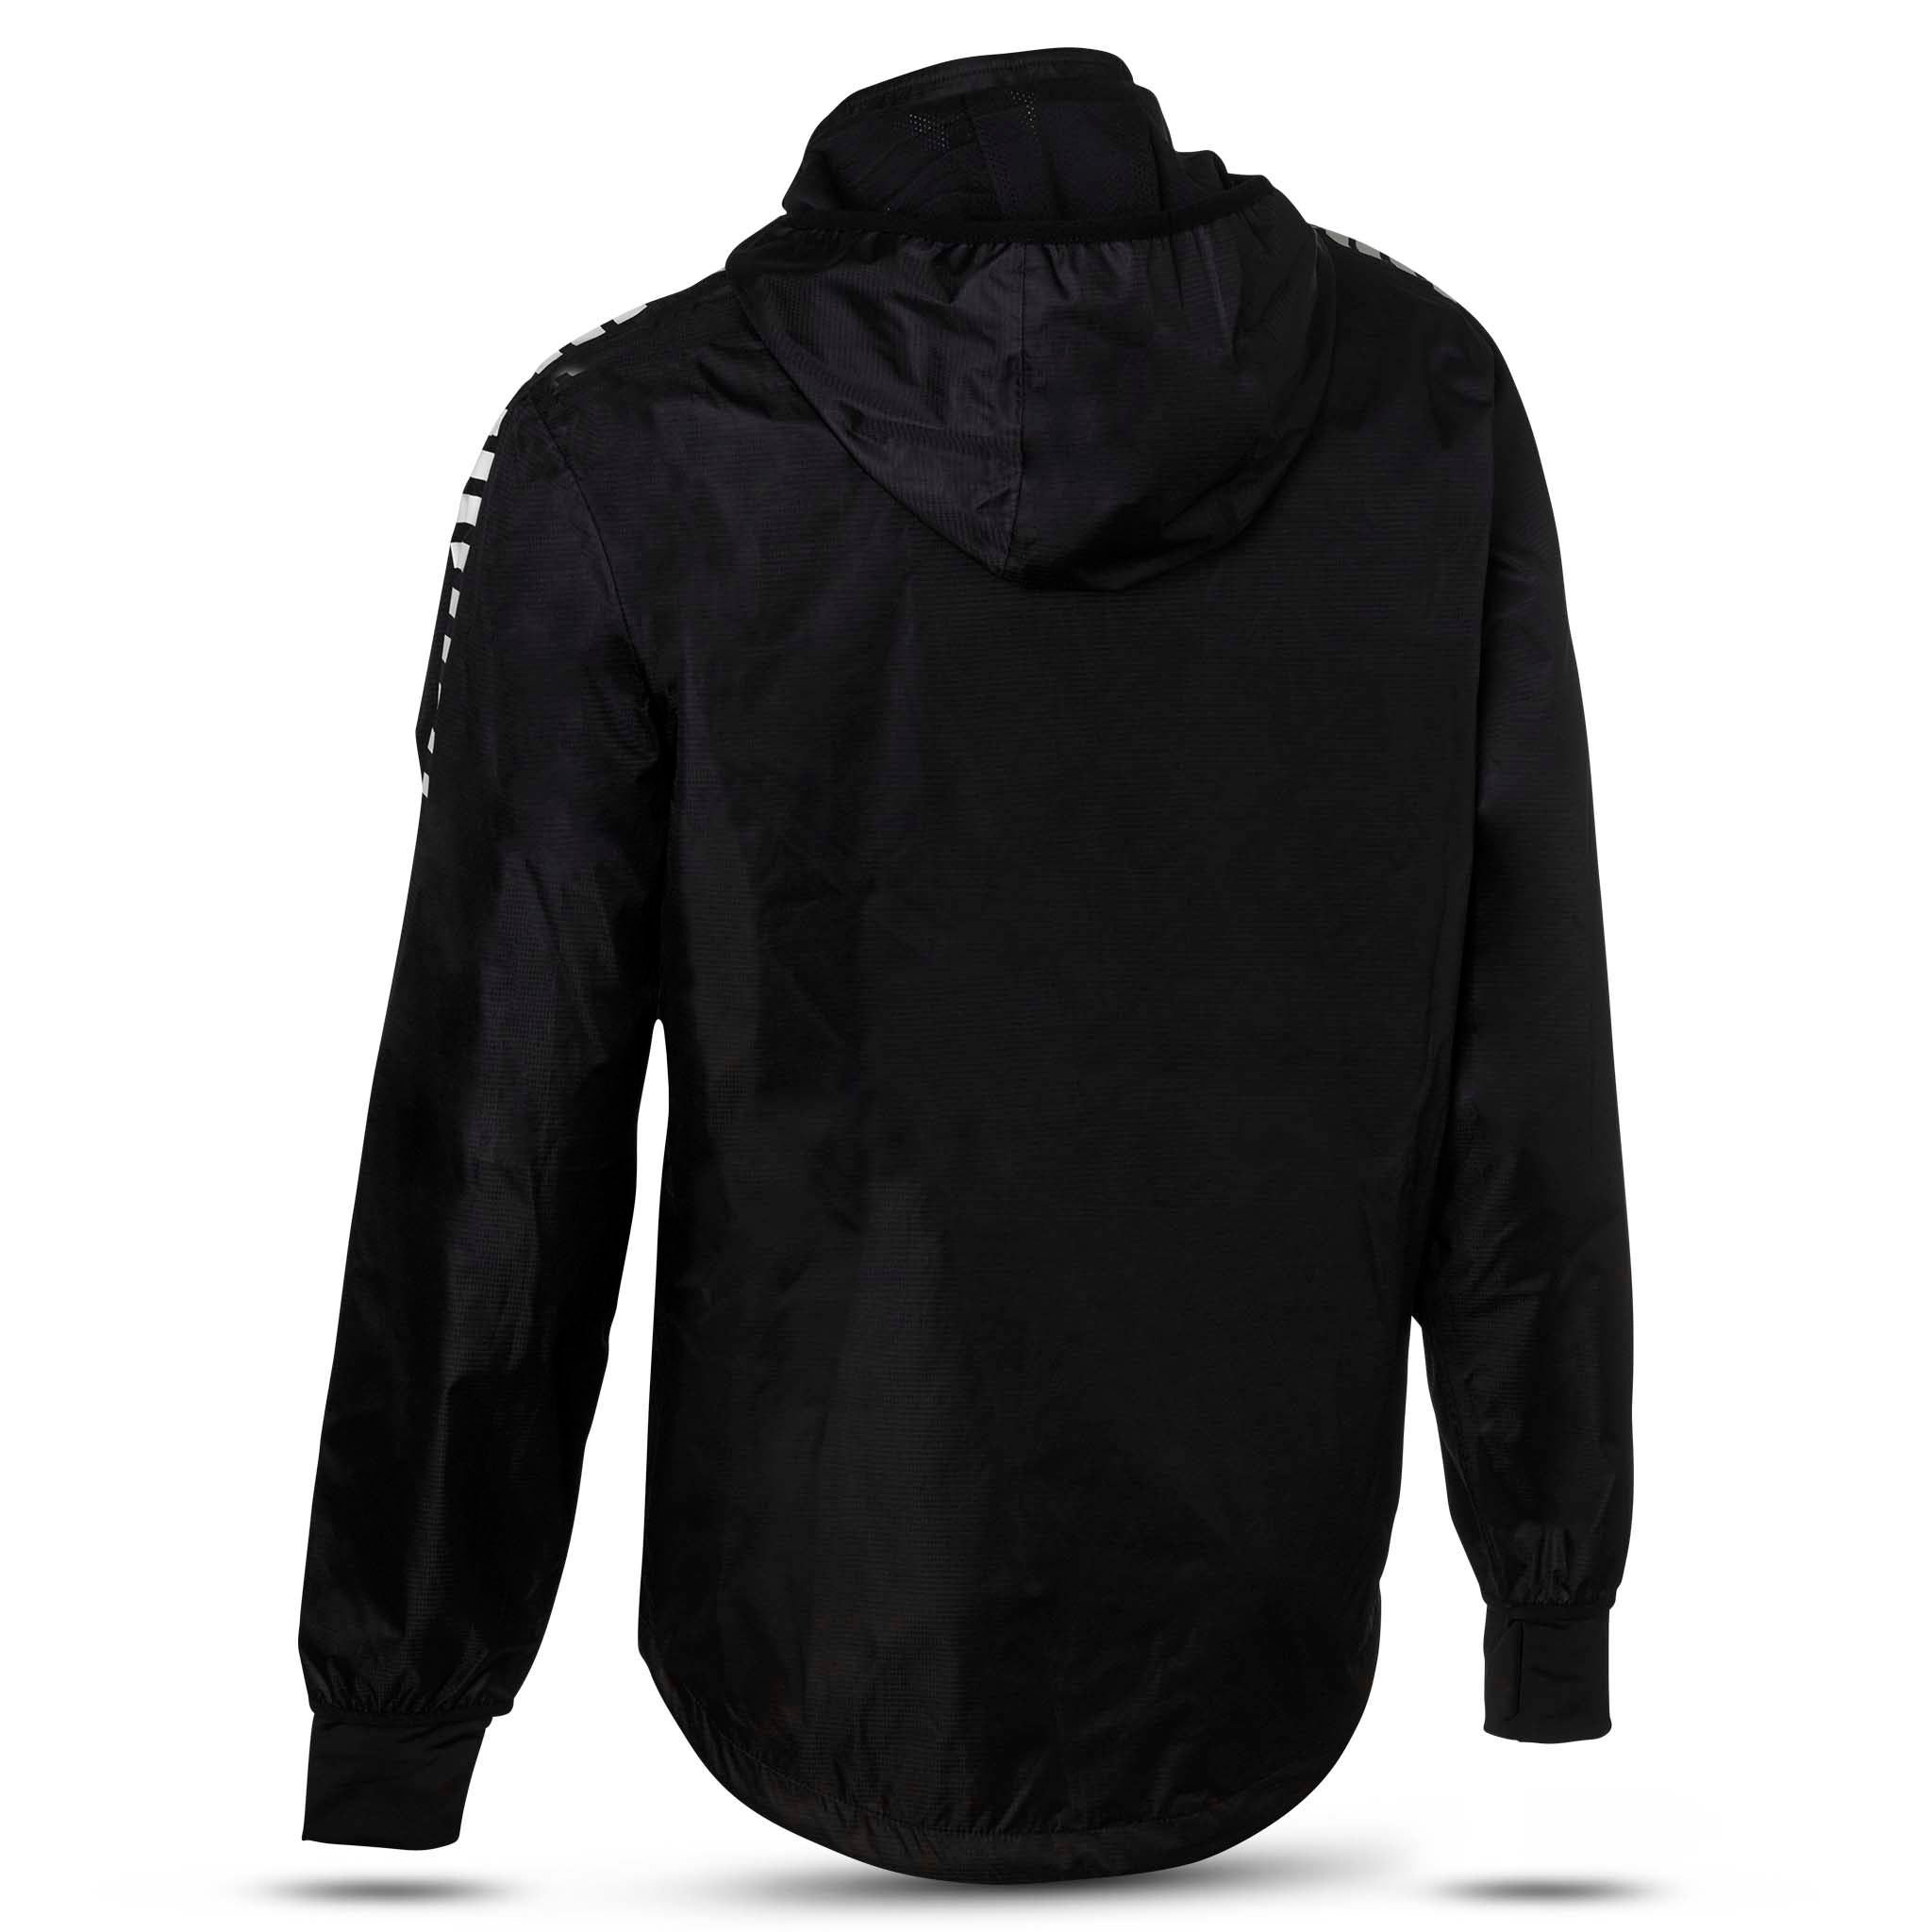 All-weather jacket - Monaco, youth #colour_black